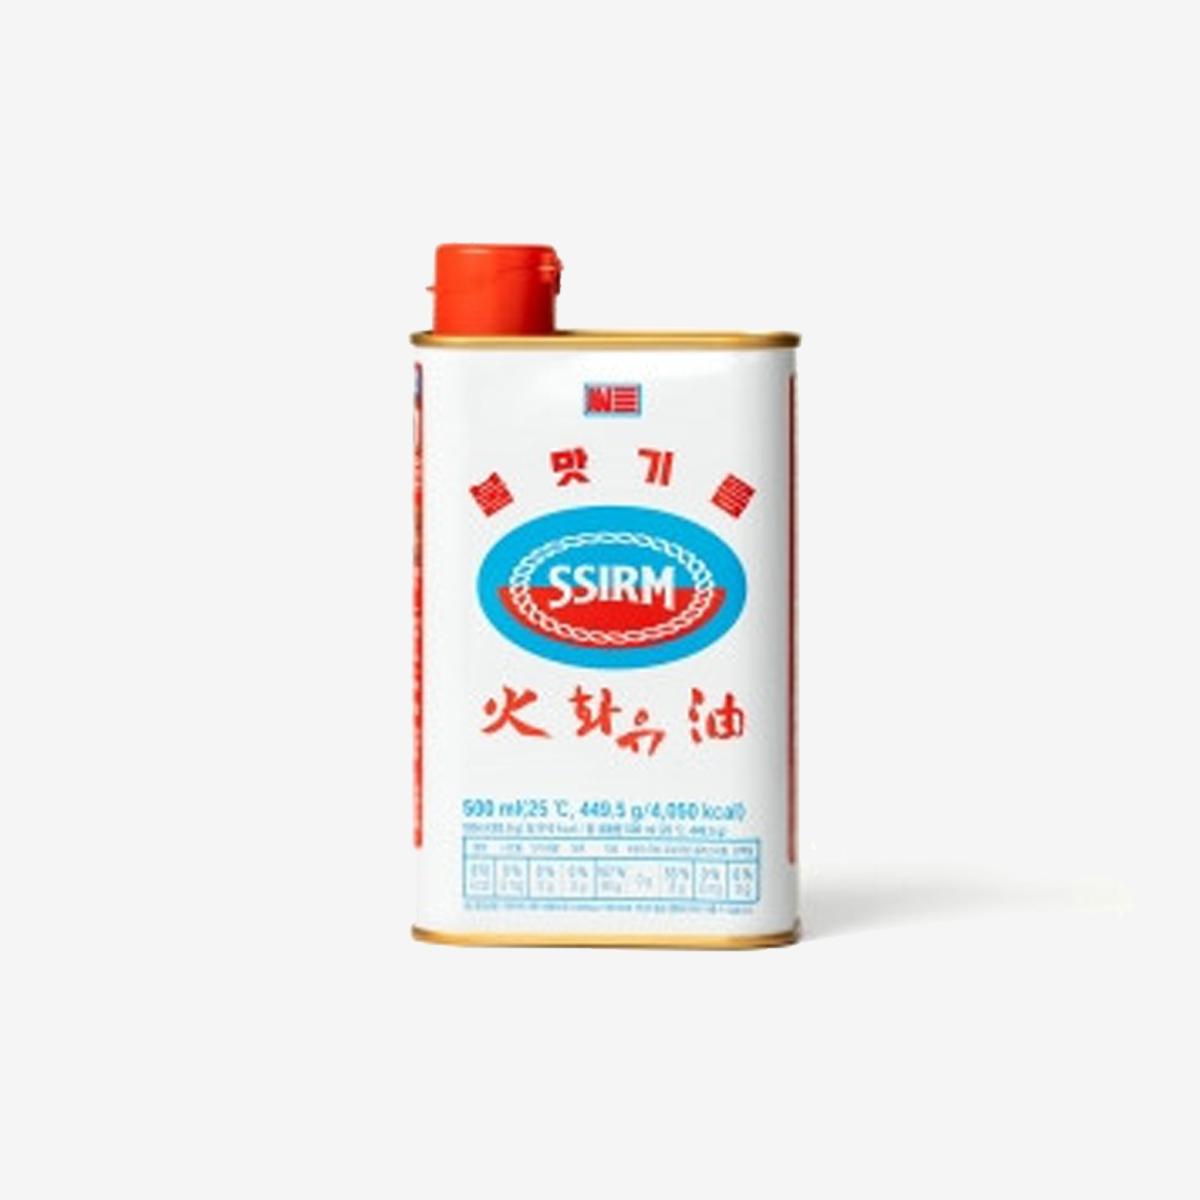 Chili Flavored Cooking Oil (500ml)